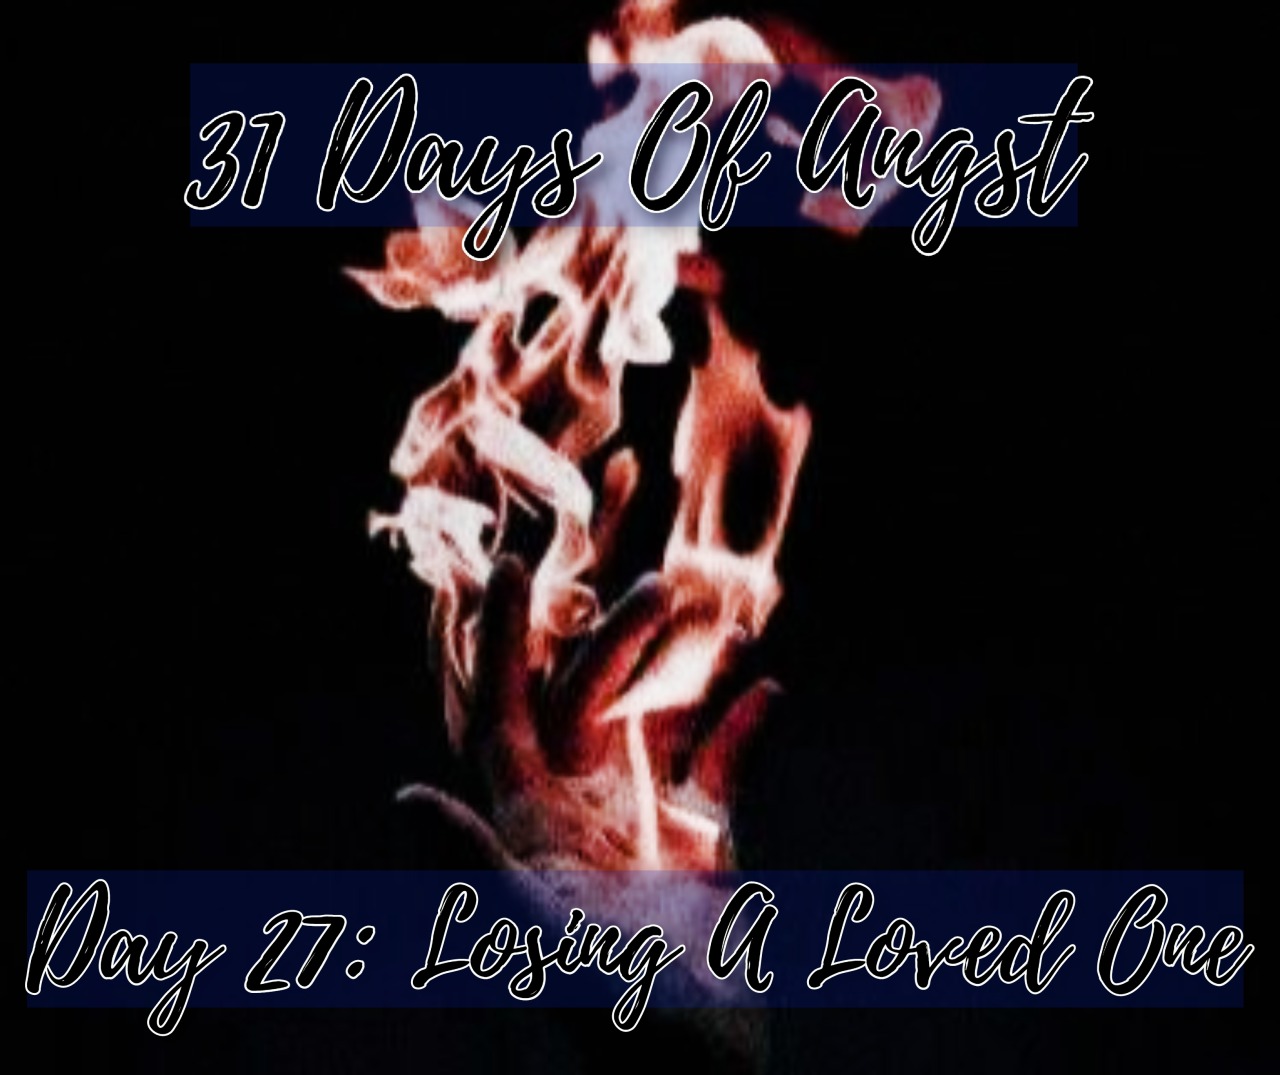 Almost at the end of our angst run now!! But there’s still time left for me to cause some emotional distress before it is dkflgjdflgfd 😂Follow up to Day 5 - CursedAlso on AO3!!!DAY TWENTY SEVEN: LOSING A LOVED ONEChloe missed Beca in a way that she had never thought it was possible to miss another person. The first month at her Grams’ had been suffocatingly lonely, Chloe had stayed in her room, too angry to be around her and not trusting herself to do something she knew she would inevitably regret. The only time she saw anyone was when her Grams sent someone with her next meal, which Chloe ate very little of. Every day, Chloe wrote a letter to Beca. She couldn’t send them, there was no way to without her Grams finding out, and it wasn’t like it helped ease the pain her chest, but she felt like she still needed to maintain that connection, to remind herself of why she was doing this. Because the urge she got to climb out of her window and run back into Beca’s arms every night that she tossed and turned was so strong that she needed to remember that this was the only way to protect her.After a month, Chloe was surprised by a very welcome visitor.“Hey Chlo-bear...”Chloe looked up from where she had been staring out of the window, a tired but delighted expression on her face as her eyes met her father’s.“Dad...” Chloe breathed, “What are you doing here? Grams said I couldn’t have visitors.”“Oh your mom made a pretty good case...” He chuckled, Chloe able to hear the sound of her mom’s voice drifting from the living room two floors away.“Do you think I care about your damn legacy?! That is my daughter, you do not get to lock her up here because you don’t approve of the woman she loves!”Chloe chuckled softly, sniffing as she wiped the tears from her cheeks, “I take it Grams isn’t listening though?”“No kiddo...” Chloe’s dad sighed softly as he came and sat opposite her on the window set, “I’m so sorry.”“It’s fine.” Chloe shrugged a little, her head resting against the cold glass, “It means Beca isn’t in pain anymore.”“She misses you.” Chloe’s eyes filled with tears as her eyes snapped to meet her dads, a small gasp leaving her lips, “You’ve seen her?! Is she okay?!”“She came to us the night you left.” Her dad smiled softly, “She wanted us to do something, to get you to come home, but most of all she wanted to know that you were safe.”Chloe bit her lip as her head fell back against the wall with a soft thunk, “I can’t come home dad... Beca was dying, she was in so much pain all the time I... I couldn’t keep doing that to her.”“I know.” Her dad reached out and gave her knee a gentle squeeze, “I told Beca that, your mom has been fighting with your Grams every day for the last month-”“Fuck you, you wizened old hag! You have no right to do this!”“As you can hear it’s going very well...” Her dad sighed, Chloe giggling tearfully.“I miss her so much dad...” Chloe whispered, “I- I don’t even have my ring anymore, Grams took it off me and threw it in the fire...”Chloe’s dad had to suppress a wave of anger at that. She might be his mother, but she had officially gone too far.“I wish I could help Chloe...” He shook his head, “But this kind of magic, it’s only passed down through the female line and I-”“It’s not your fault.” Chloe lifted her head to look at her dad, hating that he was carrying any kind of guilt, “Please, don’t blame yourself.”“I’m seeing Beca later.” His voice dropped to a whisper, “Is there anything you want me to tell her?”A soft smile spread across Chloe’s lips as she got up, reaching under her bed to loosen the floorboard that she’d hidden all her letters to Beca under, “I- I’ve been writing these. Just to try and explain y’know? If she’s not mad at me could you... could you give them to her?”“Of course.” Chloe’s dad quickly tucked them into the inside pocket of his jacket, “And she’s not made at you Chloe. Just the opposite. She misses you a lot.”“Just... look out for her for me?” Chloe could hear footsteps ascending the stairs, “She doesn’t have anyone else.”-----When her dad had come back a month later with a letter from Beca secretly stowed in his pocket, Chloe had burst into tears. Something about that familiar scrawl made her heart soar and that hole that she felt inside her seemed to fill a little. It was by torchlight under her sheets that Chloe read the letter that night, not daring to do it while her Grams was awake.Chlo,Oh my god, you have no idea how happy I am to have all these letters from you... even if it’s taken me like two weeks to get through all of this rambling. I don’t even care, what else would I do now you’re not here? I miss you so much... I get it, I get why you left but it’s like there’s this hole in my chest now you’re gone. I sleep wrapped around your pillow, how lame is that?? But it smells like you and that’s all I care about. I should’ve kissed you before you left, I should have savoured those moments with you more. But I don’t want you to feel guilty Chlo, I’m sorry, that all sounds so awful... I  love you so much, I hope you’re okay living with the Wicked Witch Of The West. I swear if she’s hurting you I’ll come over there and kick her ass myself. You’re eating right? And sleeping? You get cranky without any sleep and you need to eat, I know you forget when you’re stressed...We’ll figure something out Chloe. You and me, we’ll work this out. Because I’m not going anywhere, I’ll wait as long as it takes, even if it’s years from now. I love you, that’s never going to change okay? I love you Chloe Beale. you are the love of my damn life and we’ll be together again, I just know it.Your dad said he’ll pass along as many of these as he can so I hope you’ll write me another thousand letters for me to read??I miss you.Love, always.Beca xxxIt was the first of many letters passed between the two of them as the months wore on. Chloe would wait until her Grams was asleep before slipping downstairs to peruse her library of magical tomes, teaching herself in tiny snippets of the early morning. It was slow progress, progress that would be a lot faster if her Grams was teaching her, but Chloe refused to give her what she wanted.They had a plan, she and Beca had a plan. It was a long shot, and a long game, but if it worked... god it would be so worth it.-----Beca paced back and forth outside the house, her heart fluttering in her chest. This had to work, it had been two years of sneaky letters and long cold nights alone, this had to be the end of it... they’d planned this moment down to the every last detail, to every single possible scenario and thing that could go wrong.“Becs?”Beca’s breath caught in her throat as she spun on her heel, tears in her eyes. A watery grin spread across her face as her eyes roamed over the achingly familiar red hair, the electric blue eyes, the soft smile that she had missed so much.“Chloe...” Beca breathed, hands shaking as she seemed to freeze for a moment. She couldn’t believe she was really here.Chloe ran to her, arms thrown around Beca’s neck as Beca’s wrapped tightly around her waist, sobbing into her shoulder as she held her as tight as she could.“I love you.” Chloe choked through her tears, “Oh baby, I love you so much...”Beca just held her tighter, too overcome with emotion for words as she breathed in the smell of Chloe’s shampoo. She loved that smell, GOD she’d missed that smell.“Let’s go home.” Beca mumbled into her neck, head lifting to rest against Chloe’s. “Let’s get you home Chlo, where you belong...”“Yeah.” Chloe nodded, pressing her lips into Beca’s for the first time in years, “Let’s go home.”“Chloe Elizabeth Beale...” Chloe let go off Beca with a yelp, spinning on her heel as she pushed Beca behind her, nostrils flaring as she stared down her grandmother.“What the hell do you think you’re doing?”“I’m going home Grams.” Chloe swallowed hard, hands clenching into fists, “I’m going home to Beca, and there’s nothing you can about it.”“You have doomed her.” Florence growled, twisting her hand, “I warned you what would happen.”Beca let out a loud shriek as a pain she hadn’t felt in years spread through her, forcing her to her knees as it spread up her arms, down her back, everything from the waist up burning as flames enveloped her. Chloe turned to Beca with fear in her eyes, hand resting just below her waist where the flames weren’t.“You’re okay baby.” Chloe whispered, “Just breathe for me...”Beca panted through her tears, gripping the grass underneath in her hands. It hurt so much, Beca had missed Chloe so damn much, but she had not missed this. And then, as Florence watched in shock, the flames dampened and dissipated, Beca’s burns soothed and healed, and she slumped into Chloe’s arms.“What...” Florence mumbled, “H-How?”“Just because I didn’t learn from you doesn’t mean I wasn’t learning.” Chloe’s eyes were narrow as she cradled the still sobbing, shaking Beca to her chest, “You can’t hurt as anymore Grams. We’re going home.”“You think you’re strong enough to take me on?” Florence had recovered from her shock, furious as Chloe helped Beca to her feet.“I know I am.” Chloe’s jaw clenched as she supported Beca against her, “I’m going home now. Don’t ever come near me, or Beca, or anyone else I love ever again.”“Stop.” Florence watched as Chloe turned her back and they began to walk away from her, “I said stop!”Such was the force of Florence’s anger that it sent a wave of energy flying forward, hitting Beca and Chloe. They tumbled forwards, Chloe taking the brunt of it as they fell into a heap.“Ugh...” Beca groaned softly, Chloe like a dead weight on top of her, “Chlo... Chloe?” Panic flared in her stomach as she saw the blood trickling down her forehead, eyes finding the rock that Chloe’s head had hit as they fell.”“No.” Beca mumbled, scrambling out from underneath her as she cradled Chloe in her arms, shaking her, “No Chloe, wake up... wake up!” Chloe remained limp in her arms, Beca’s heart breaking in her chest as she pressed her fingers into the side of Chloe’s neck, praying for the impossible. She let out a loud sob when nothing could be found.“Chloe?” Florence moved forward shakily, tears beginning to well in her eyes.“GET AWAY FROM HER!” Beca held Chloe tighter, tears pouring down her cheeks, “LOOK WHAT YOU DID!”“I- I didn’t...” Florence shook her head, looking genuinely remorseful and bereft.Beca stroked Chloe’s face, lips pursed as her tears continued to pour like a torrent, “I’m so sorry Chlo...” She whispered, “I’m so so sorry... I should’ve never let you leave...”“Beca I-”“FUCK OFF!” Beca snarled, eyes blazing with anger, “YOU DID THIS! YOU KILLED HER!”Tears ran down Florence’s face as the reality of her actions hit her like a ten tonne weight. Beca was right. She’d killed Chloe, she had done this to her granddaughter.“I never meant...” Florence shook her head, words lost to her. What could she possibly say that would explain this, what reason could there possibly be to justify this?“Get away from us.” Beca held Chloe against her, shielding her from Florence as she glared hatefully at her, “I’m taking her home. That’s all she wanted, all she wanted was to come home. How could you have killed her for that?!”As a weeping Florence backed off, Beca continued to stroke Chloe’s face, rocking her still body gently in her arms.“I love you.” Beca whispered, “I love you so much Chloe. I’m sorry... I’m so sorry...”-----Florence stood on a hill above the graveyard, dark sunglasses hiding her red eyes from anyone that would look her way. Not that they would, no-one even knew she was here. She wasn’t supposed to be here, but they were burying her granddaughter today... She watched the mourners huddled together, watched her son hold his weeping wife close, watched Chloe’s friends press together in an attempt to comfort each other, watched Beca drop to her knees as Chloe’s coffin was lowered into the ground as if she wanted to follow her in. Her heart lay shattered in her chest. She had never meant for it to end like this, all she had wanted to do was protect her family line, protect their legacy... but in one simple act of anger she had been the one to doom it.Florence had seen enough as a woman with short blonde hair gently helped a sobbing Beca to her feet, holding her against her as Beca wept into her chest. It was time for her to leave.“I’m sorry Chloe...” She whispered, “I never meant for this to happen.”-----Beca sniffed as she got into the back of the car, followed by the blonde who had cradled her at Chloe’s graveside.“Did you see Florence?” Beca rolled her eyes a little, “I can’t believe she actually came.”“I know.” The woman next to her huffed, removing her sunglasses to reveal a familiar pair of intensely blue eyes, “But that’s why we had a funeral remember? Just to make sure we really sold it. And you definitely did, sinking to your knees like that? You always were dramatic...”Beca laughed as she leaned over to press a longing kiss to her lips, “You know you love that about about me Beale.”“I do.” Chloe grinned, brushing Beca’s hair from her eyes, “And it was worth it... she won’t ever bother us again.”“Does that mean you can change your hair back?” Beca frowned a little as she twirled some of Chloe’s blonde hair her finger, “Not that you’re not really hot as blonde, I just miss your red hair...”Chloe giggled, snapping her fingers as Beca’s expression lit up with delight to see it return to it’s natural red state.“Better?”“Perfect.” Beca cupped Chloe’s face in her hands, “Just like you.”“I love you Becs.” Chloe’s expression misted with emotion, “I never want to be apart from you again.”“Me neither.” Beca shook her head, “We won’t ever be apart like that again, I promise. Just you and me forever Chlo.” #pitch perfect #pitch perfect fanfic  #pitch perfect edit #bechloe#beca mitchell#chloe beale#fanfiction#moodboard: bechloe#my fic #31 day angst challenge  #31doa: day twenty seven #drabble: bechloe#drabble tag